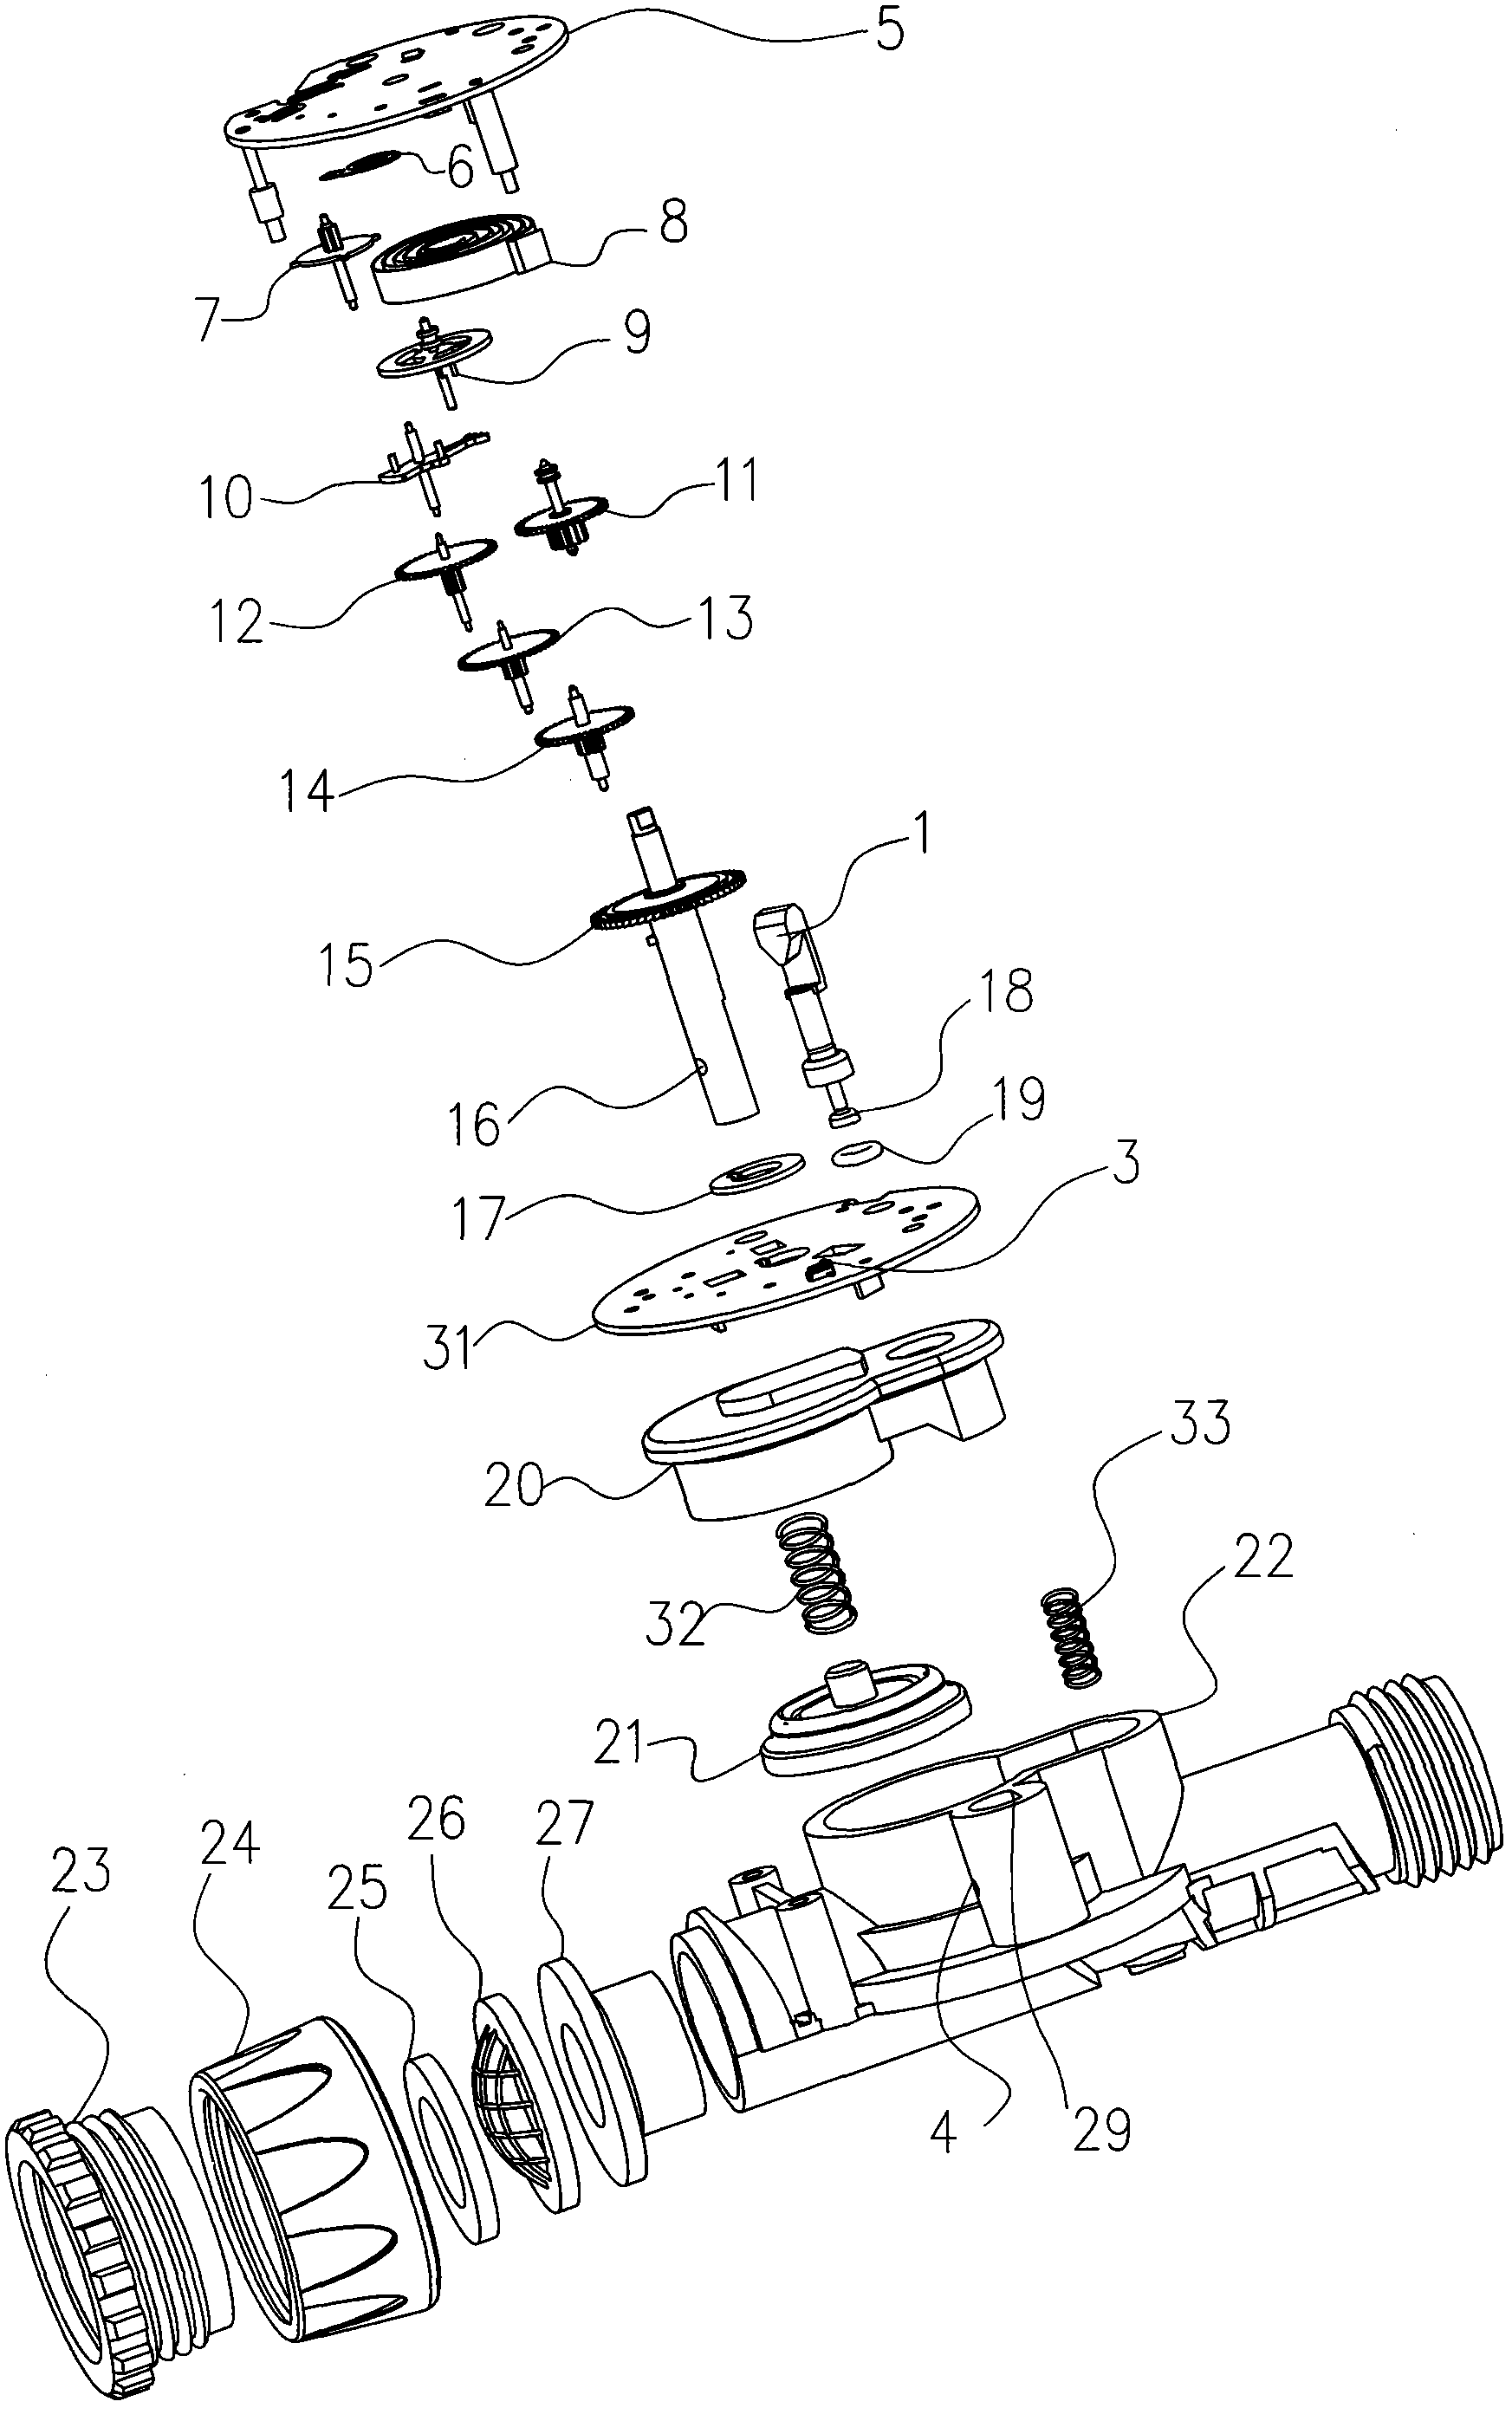 Faucet joint with clamps and combination thereof with timer and sprinkler